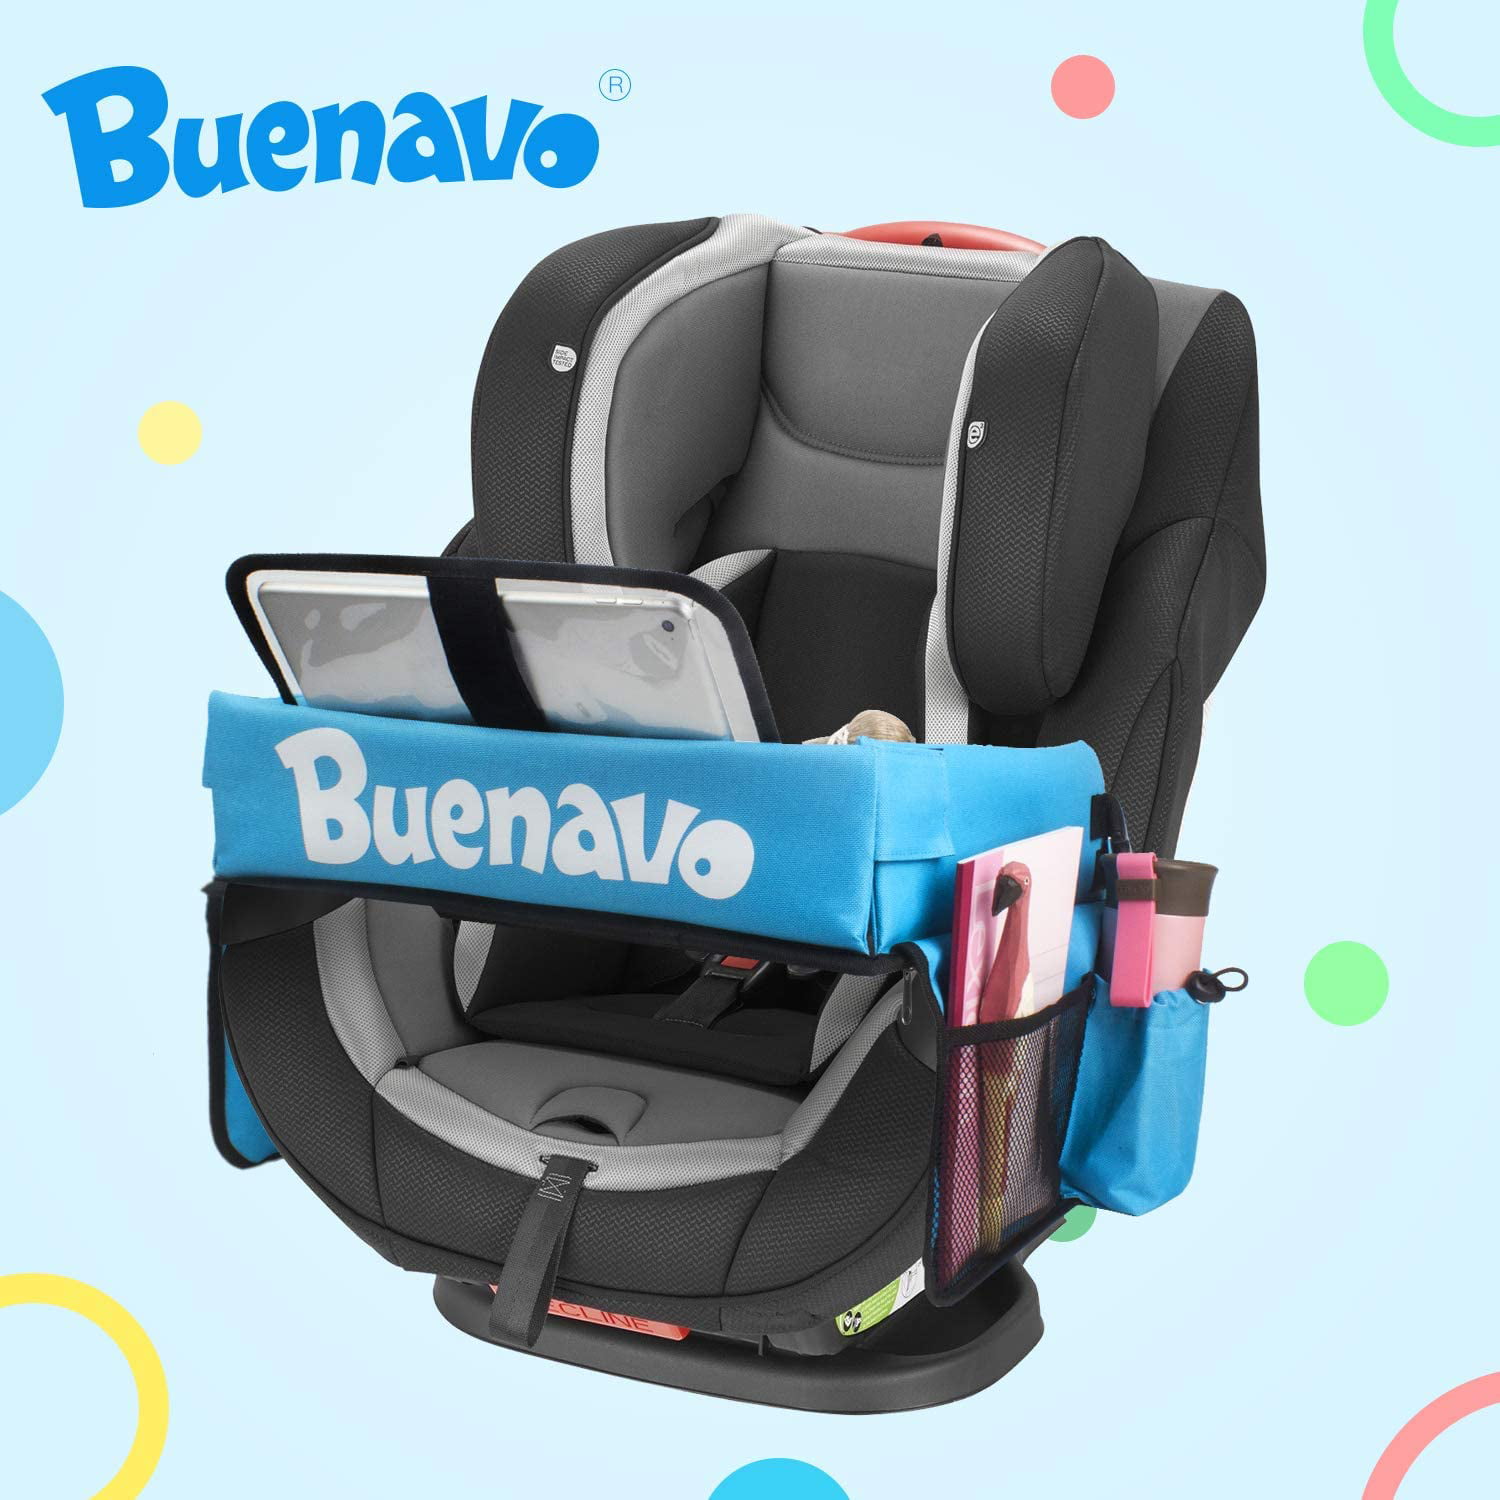 Stroller New Version Airplane Car Seat Organizer Kids Travel Tray for Kids Toddlers Activities in Car Seat Touch Screen iPad Holder Waterproof Dry Erase Top Side Pocket & Water Bottle Holder 